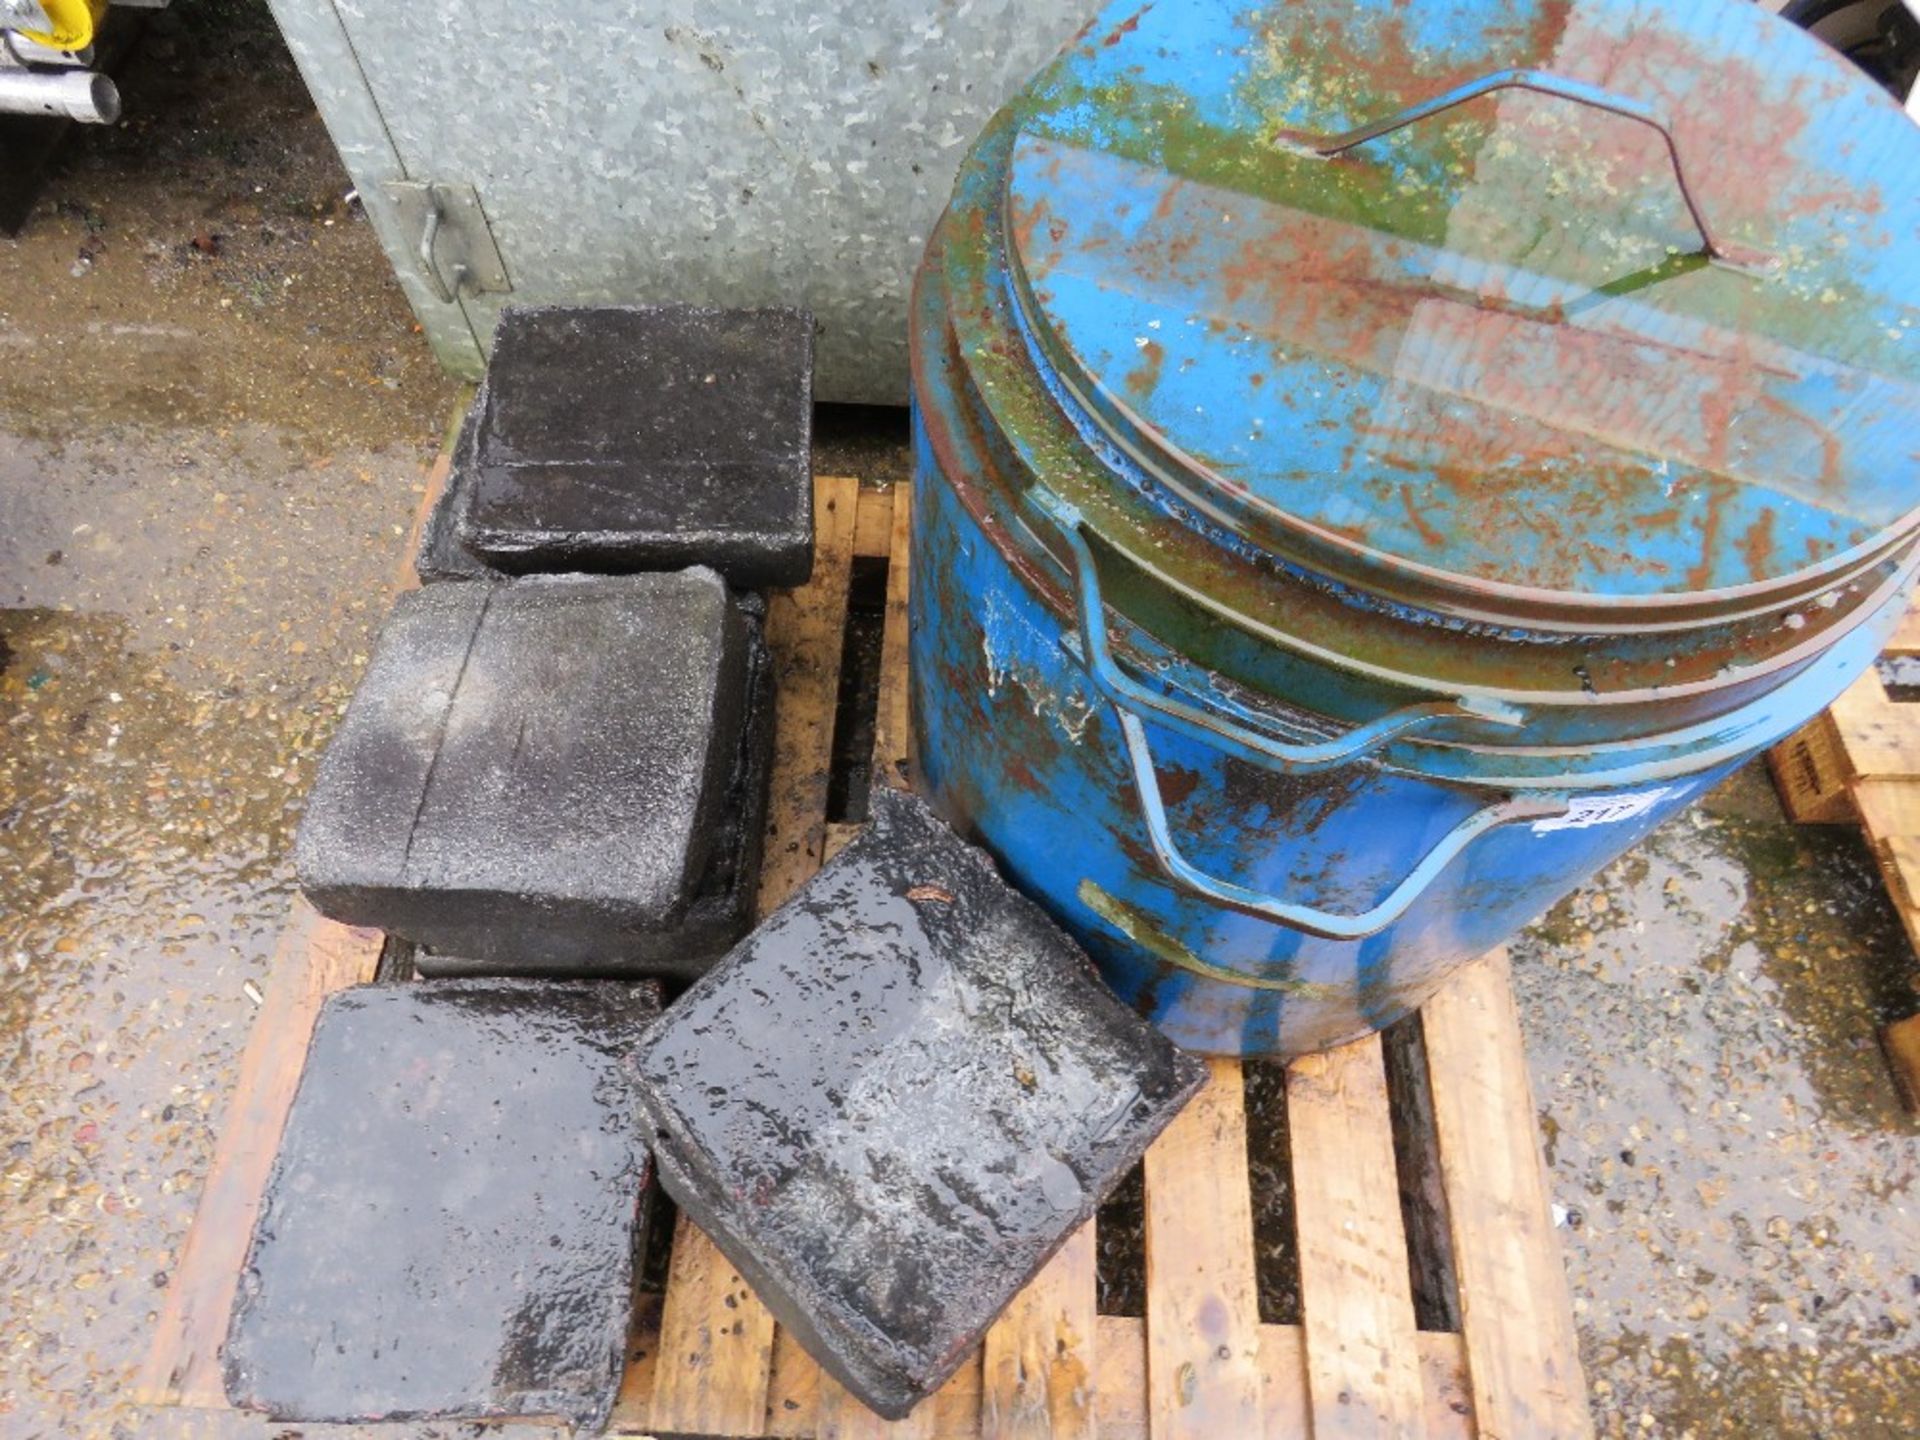 TAR POT WITH BURNER AND A QUANTITY OF TAR.